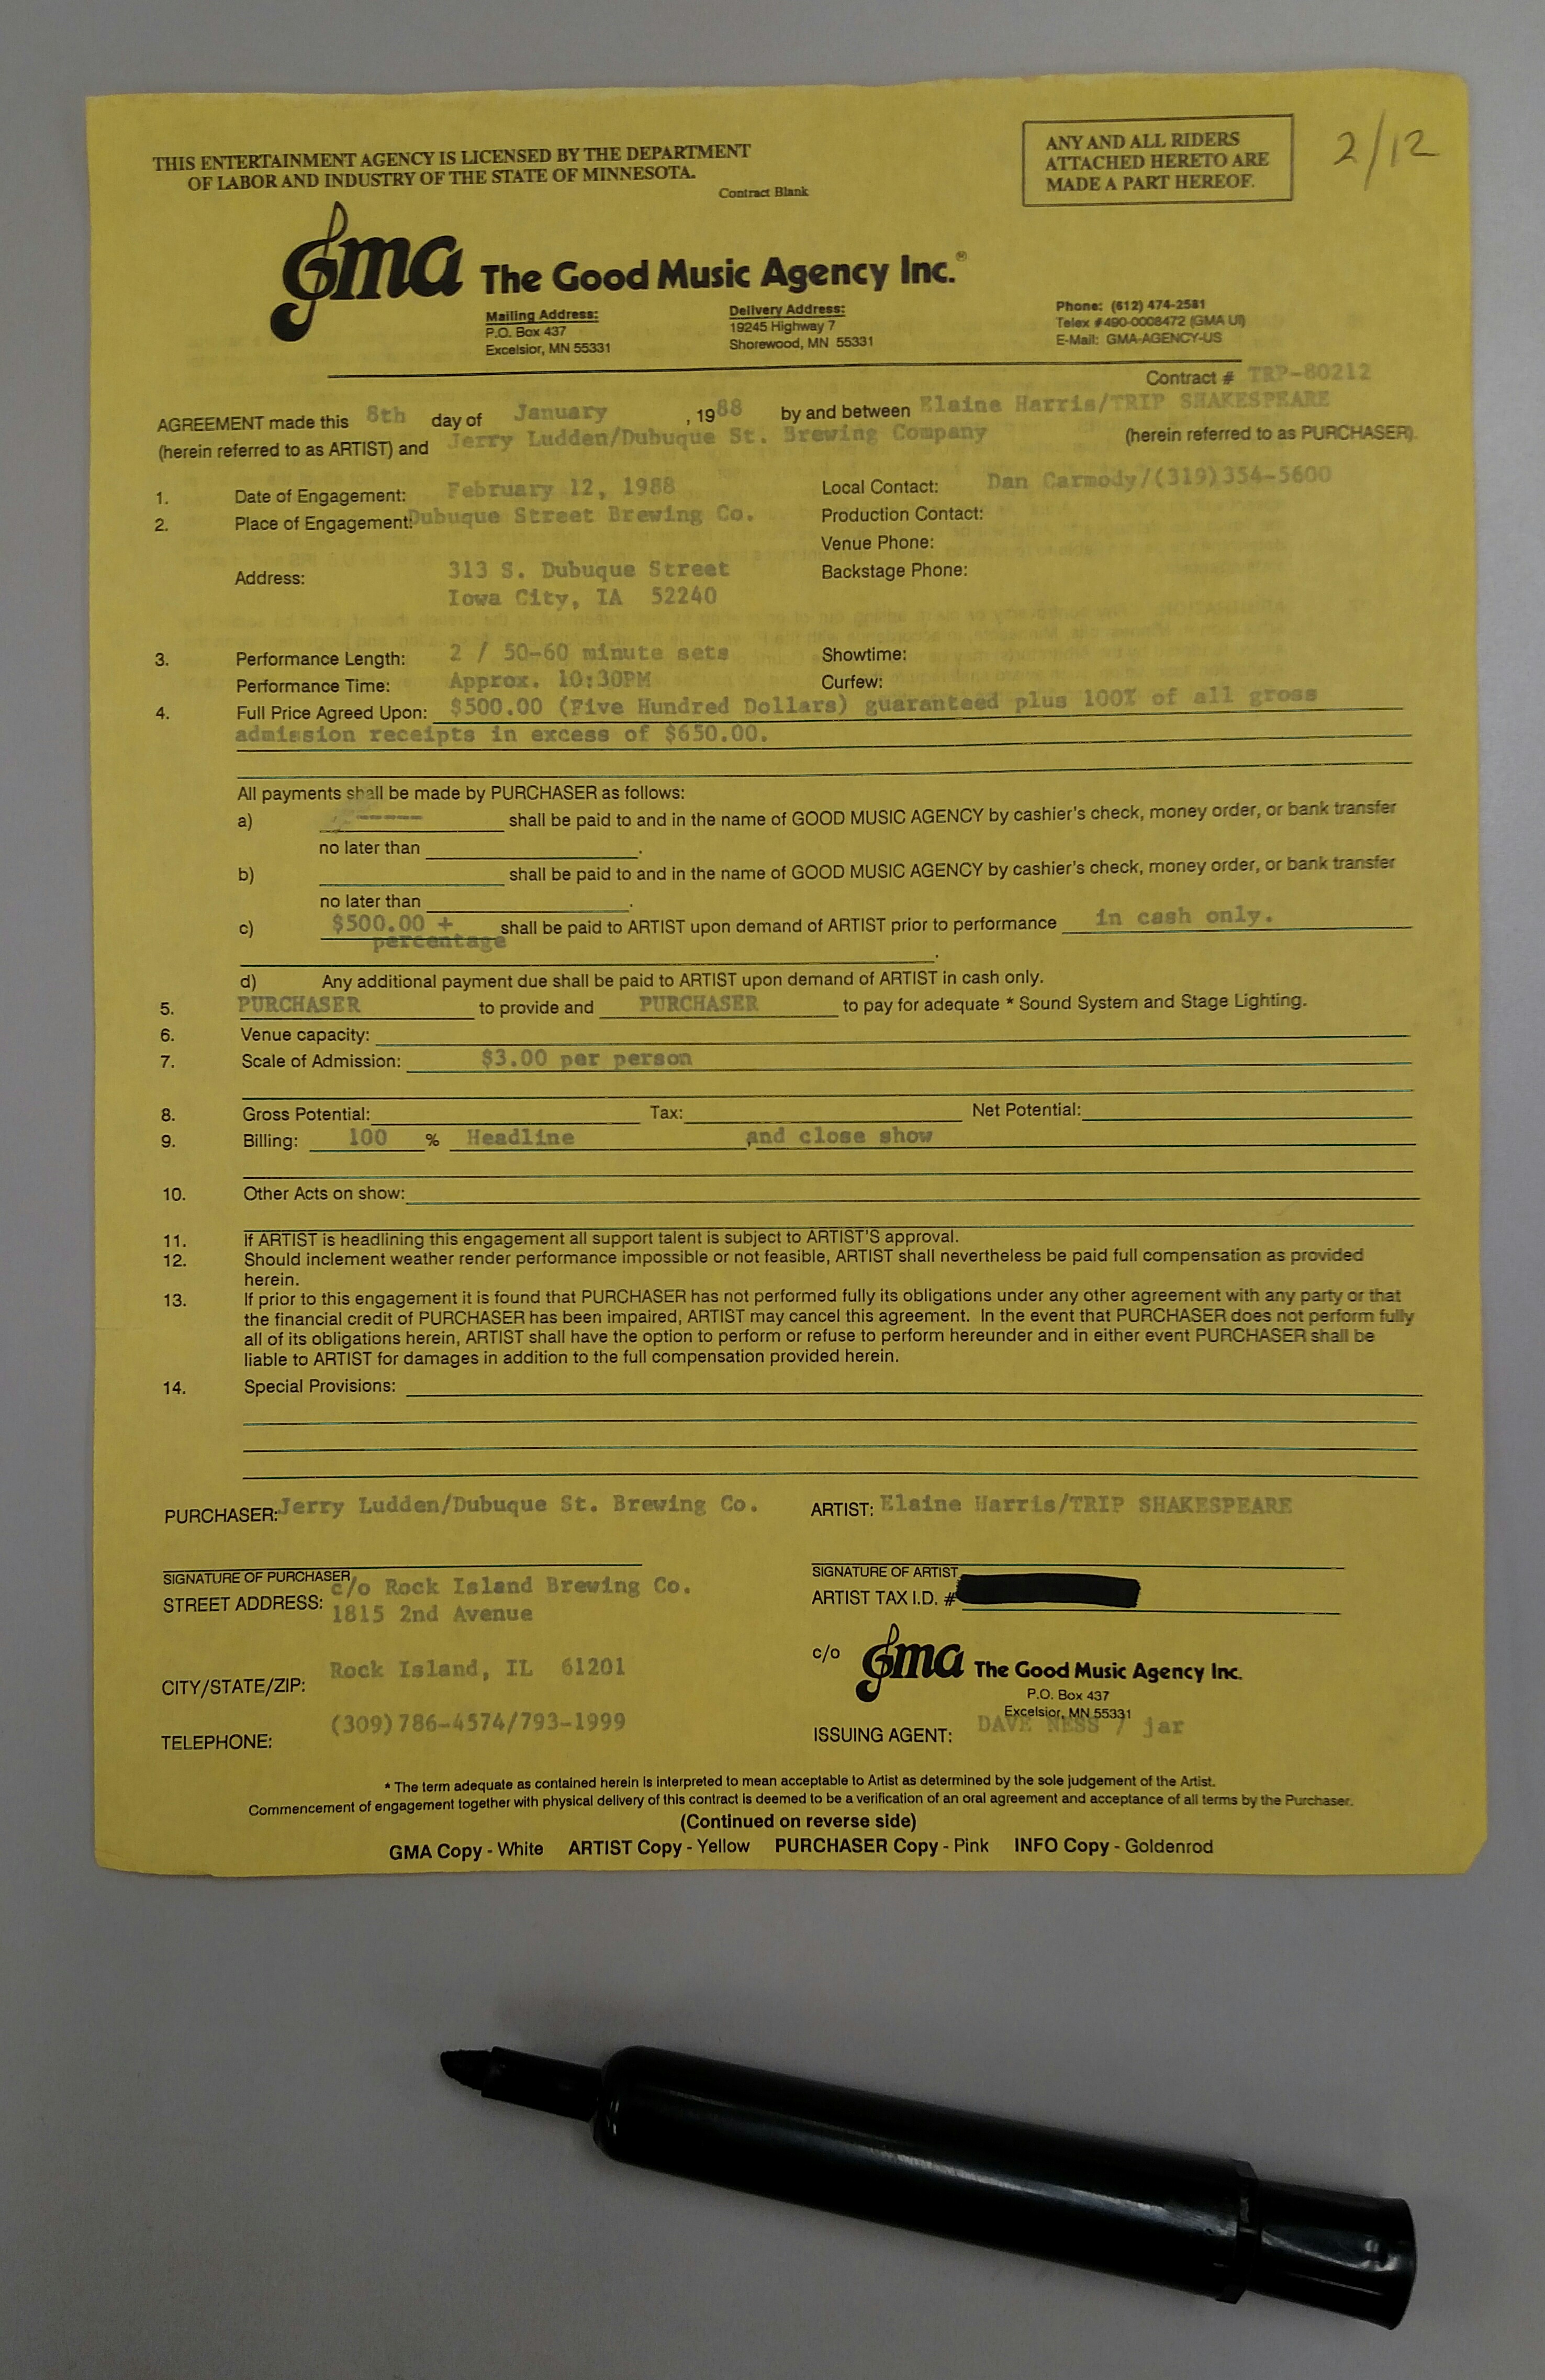 01349 Performance Contract with Social Security Number Redacted